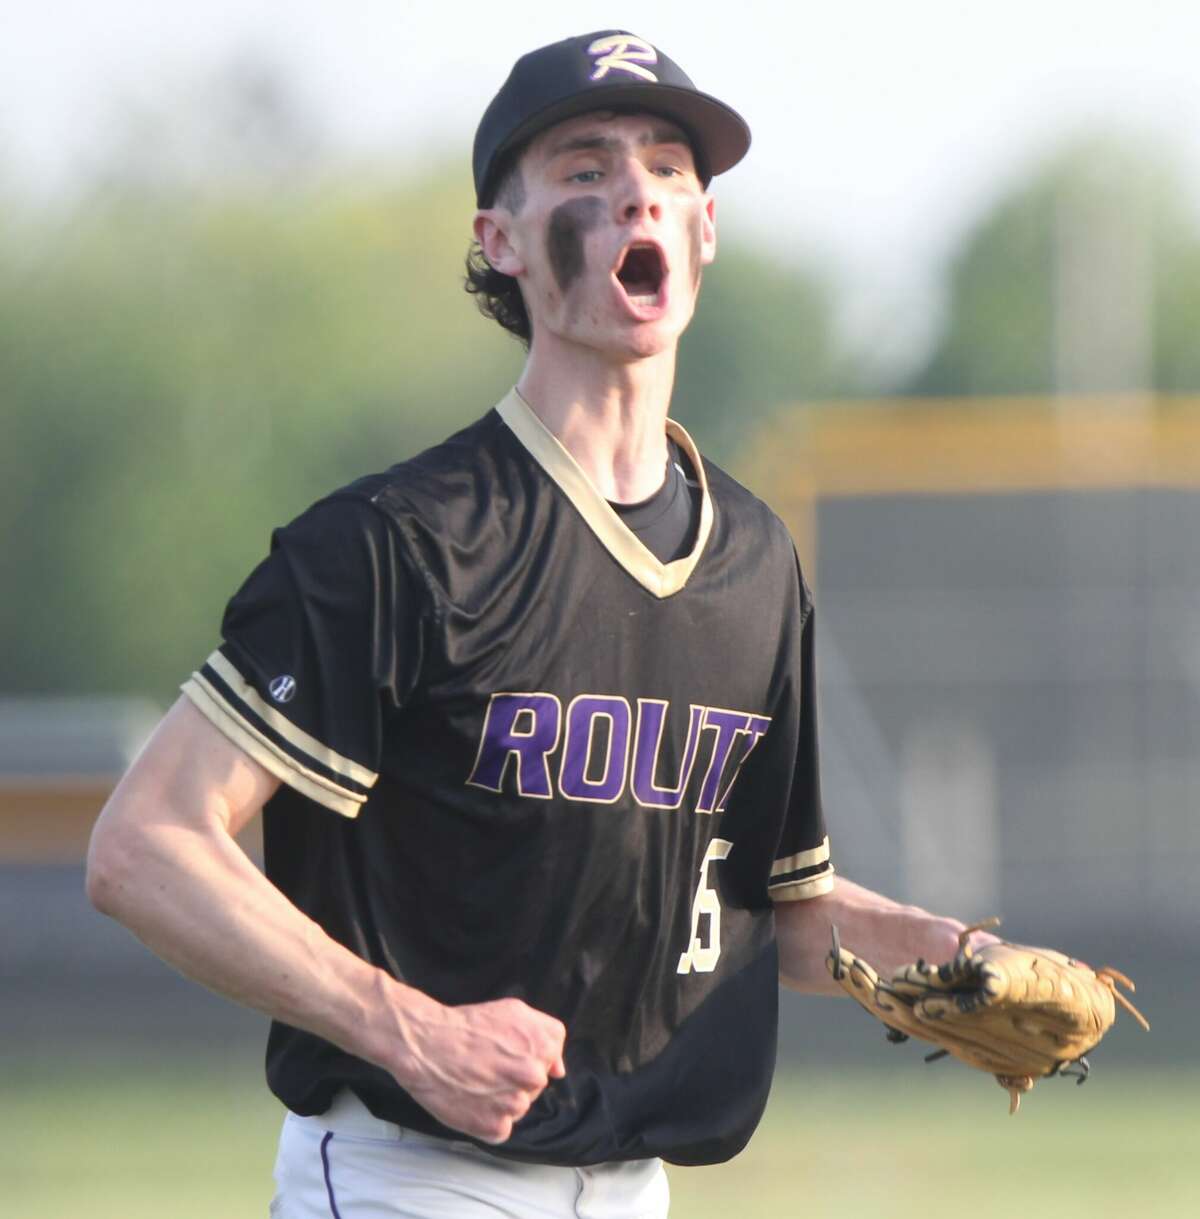 Routt's Ethan Walker reacts after striking out the side in the seventh inning of the Rockets' 2-1 win over Greenfield-Northwestern in the semifinals of the WIVC baseball tournament at Future Champions in Jacksonville on Tuesday.